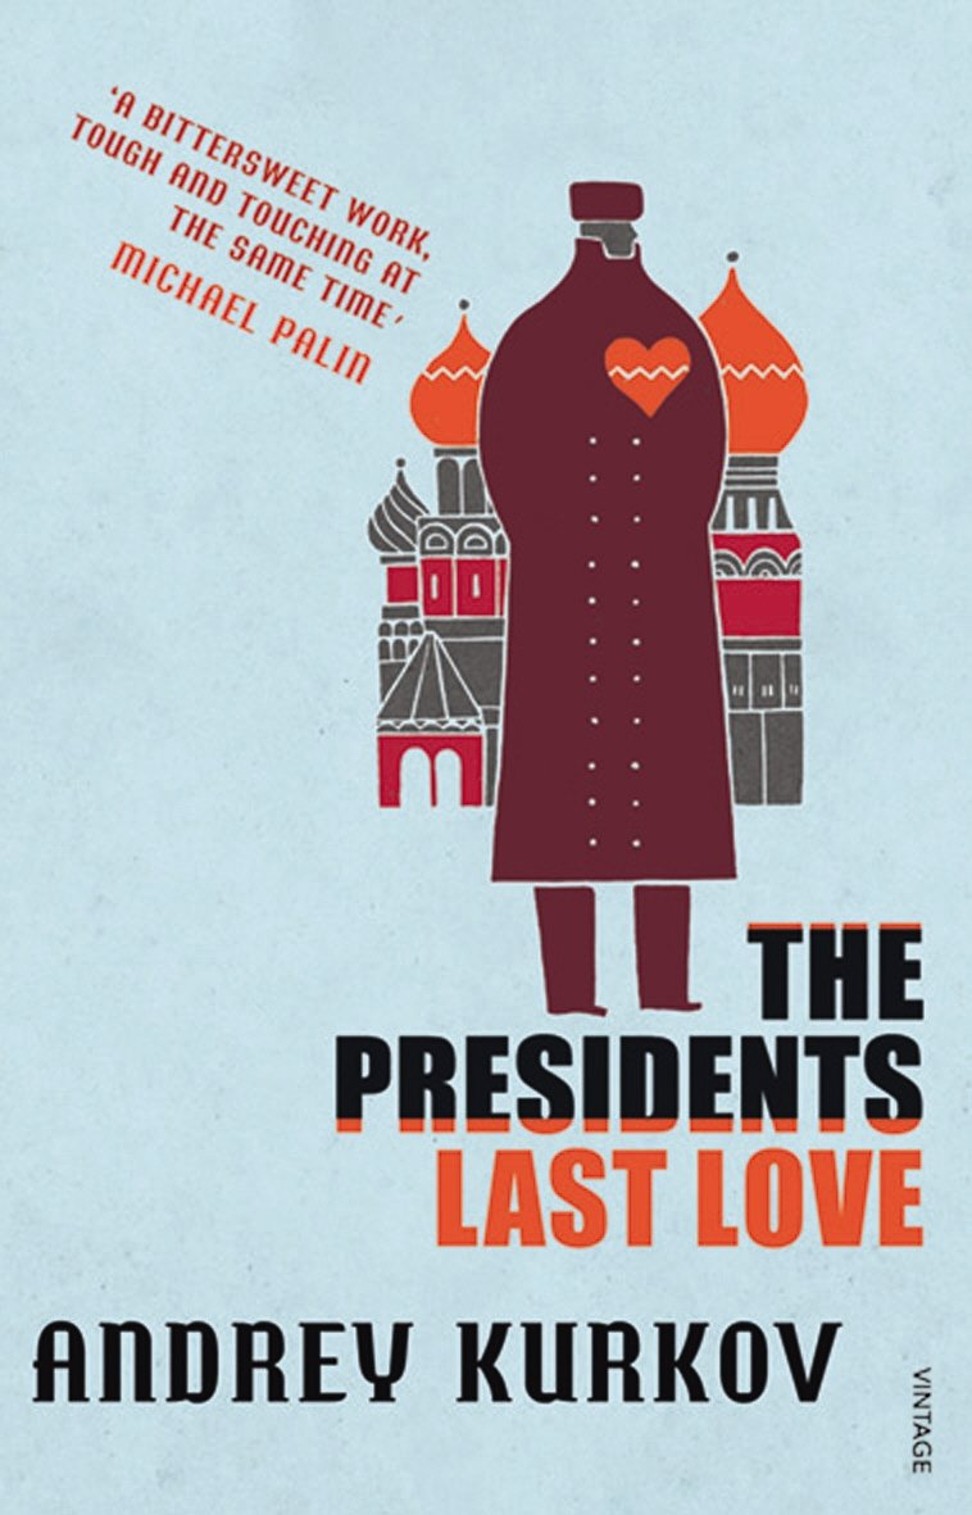 The cover of The President’s Last Love, by Kurkov